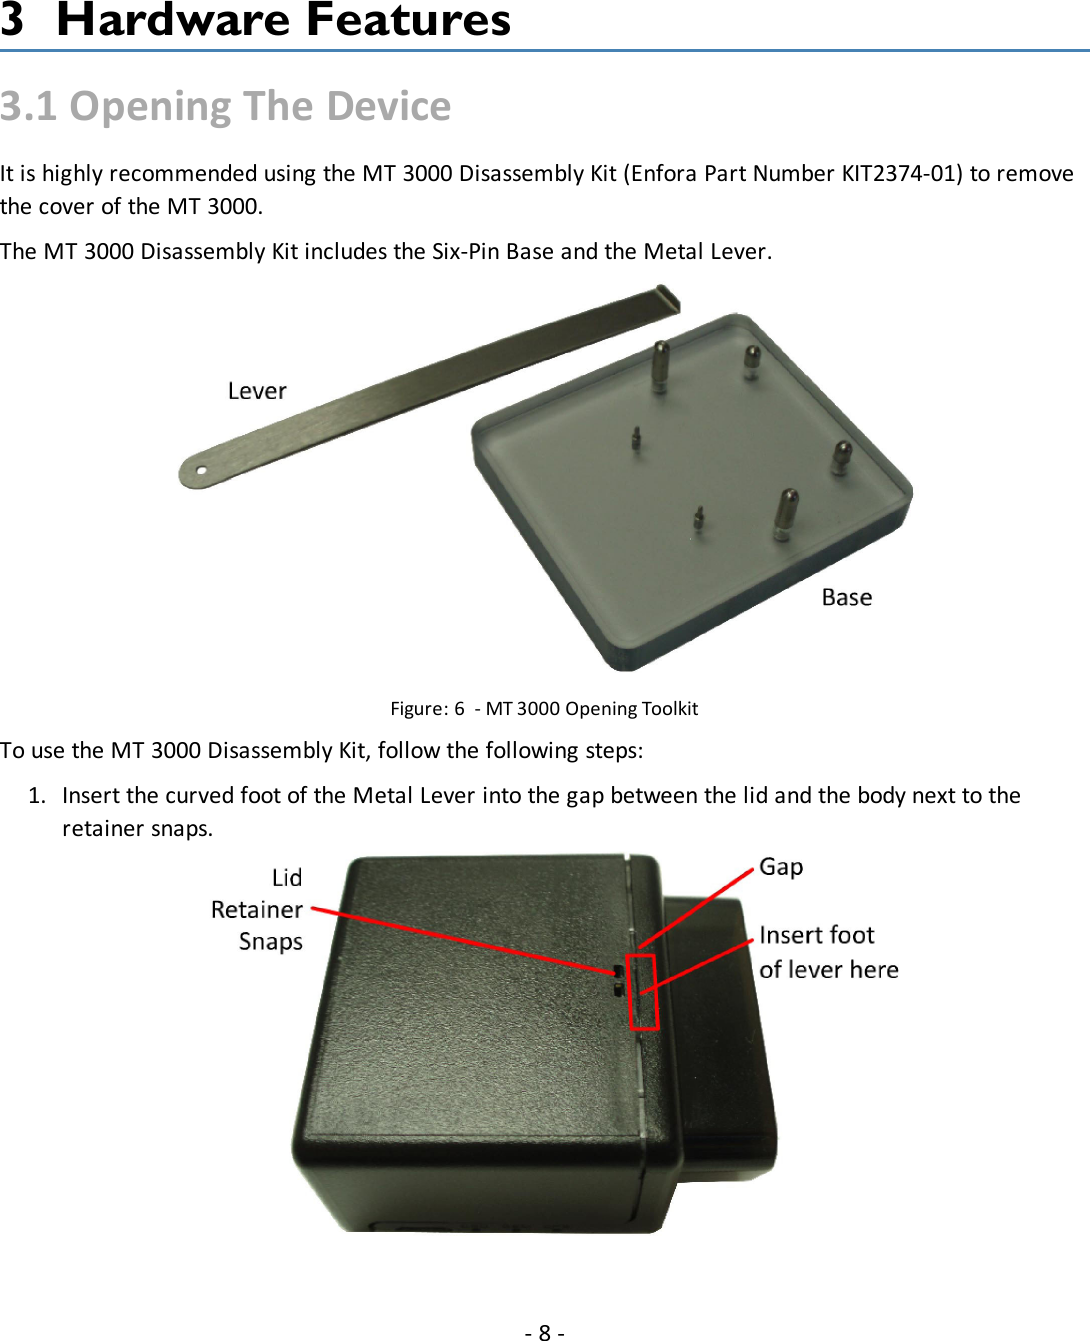 3 Hardware Features3.1 Opening The DeviceIt is highly recommended using the MT 3000 Disassembly Kit (Enfora Part Number KIT2374-01) to removethe cover of the MT 3000.The MT 3000 Disassembly Kit includes the Six-Pin Base and the Metal Lever.Figure: 6 - MT 3000 Opening ToolkitTo use the MT 3000 Disassembly Kit, follow the following steps:1. Insert the curved foot of the Metal Lever into the gap between the lid and the body next to theretainer snaps.-8-